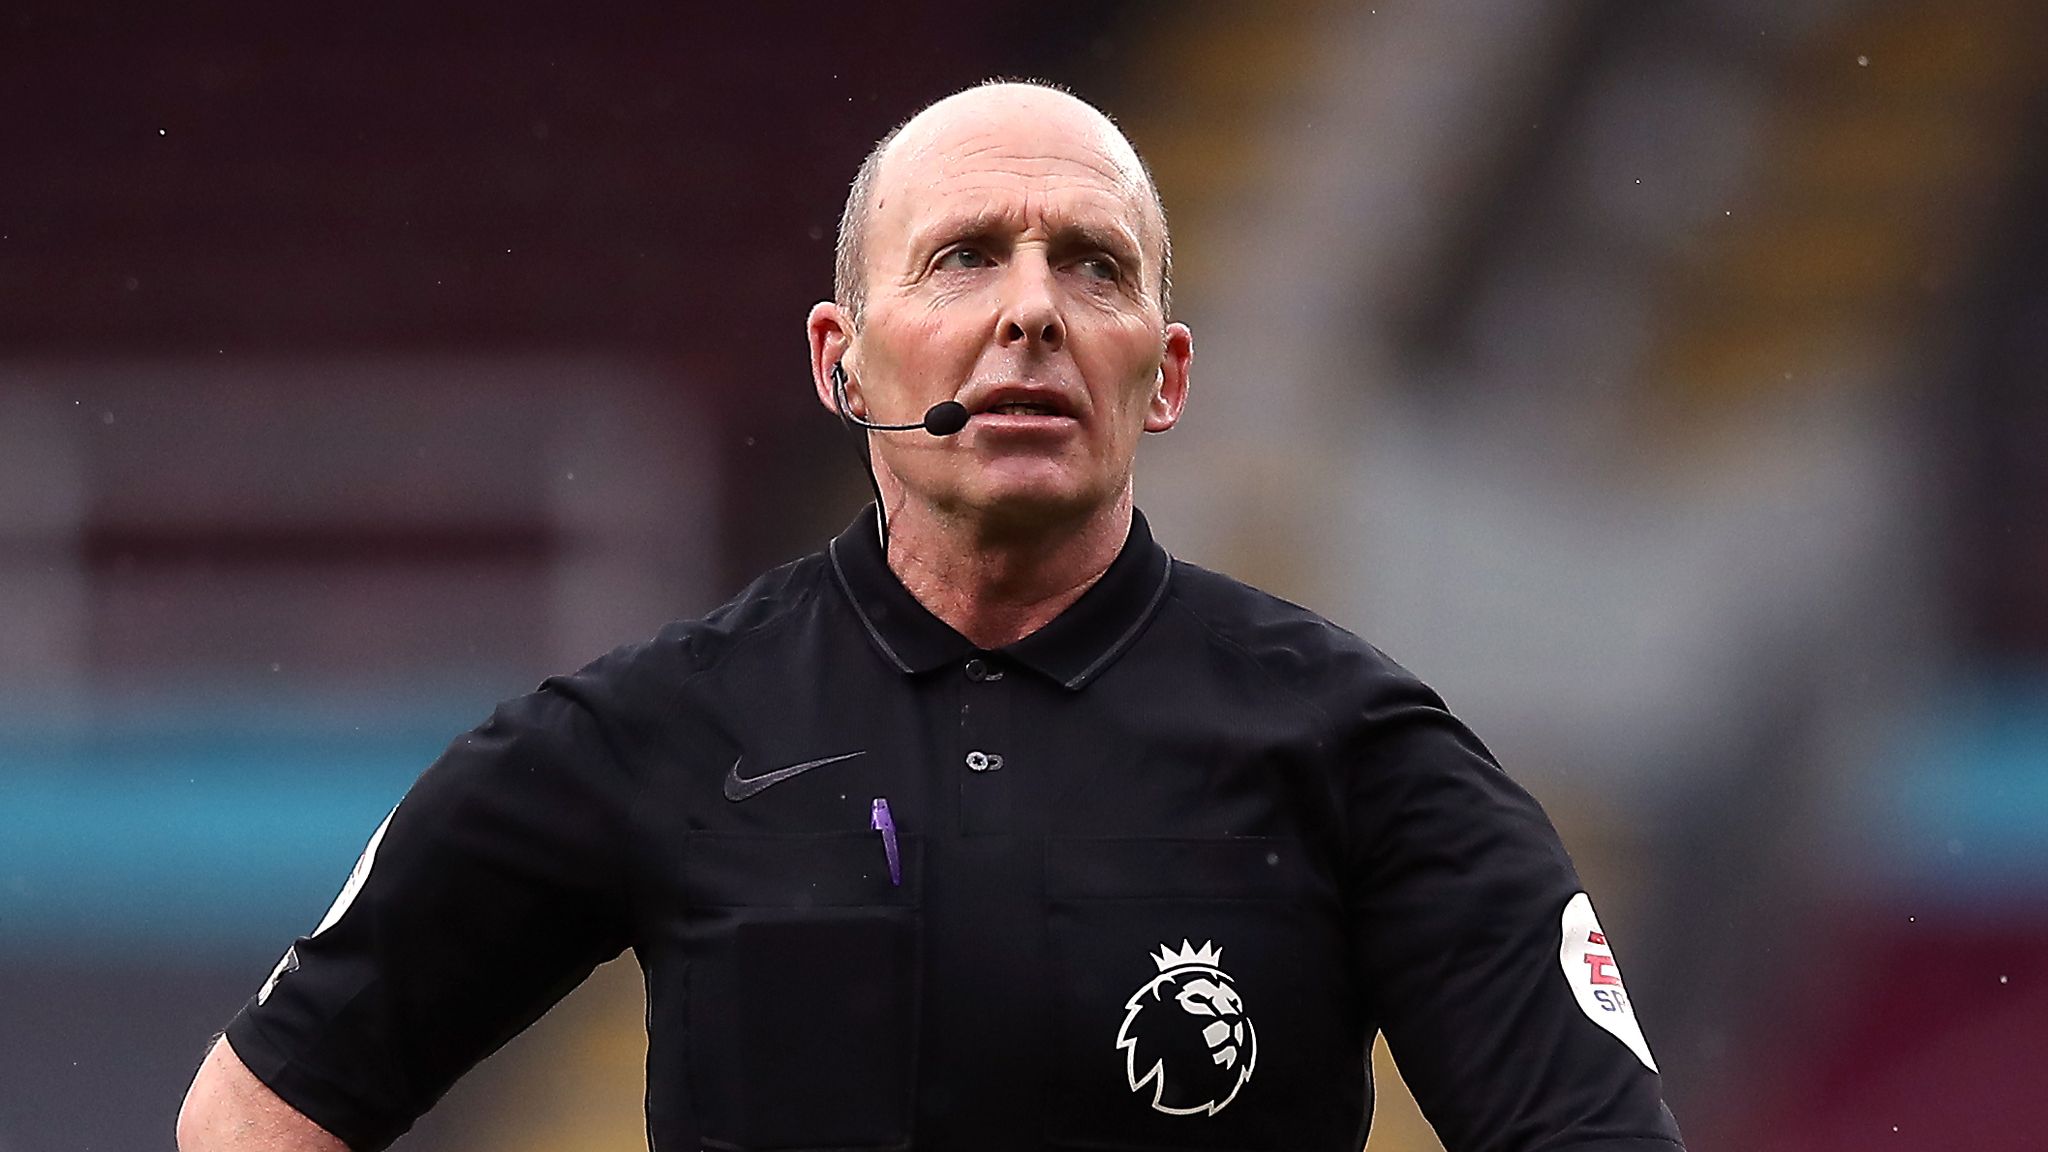 Mike Dean: Premier League referee to retire at end of season but likely to continue as VAR official | Football News | Sky Sports